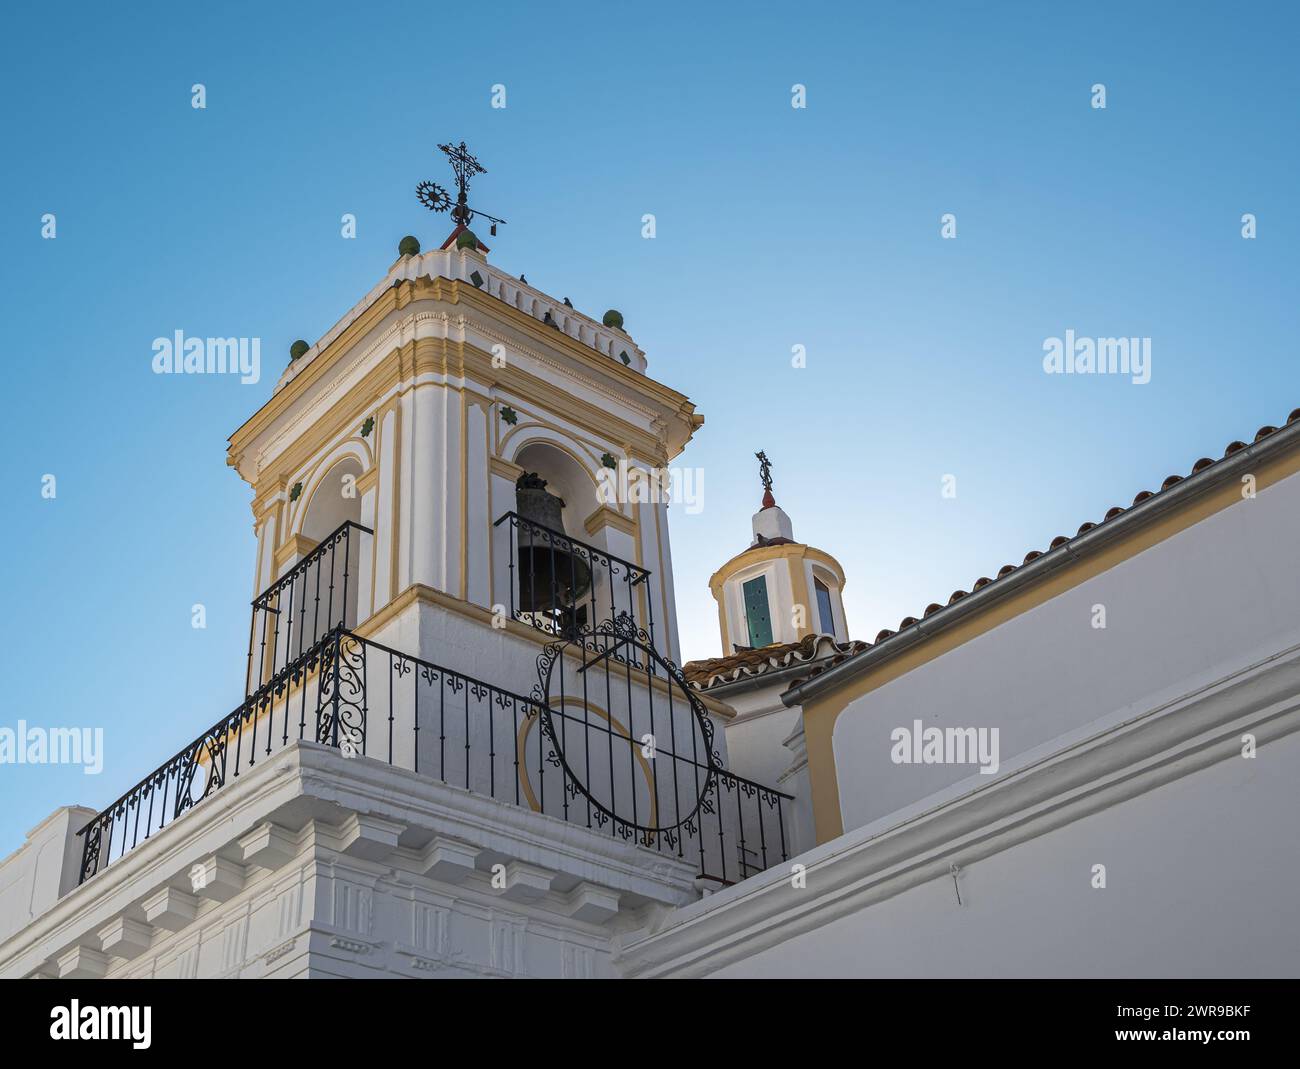 A grand building with a massive bell tower adjacent to another structure Stock Photo